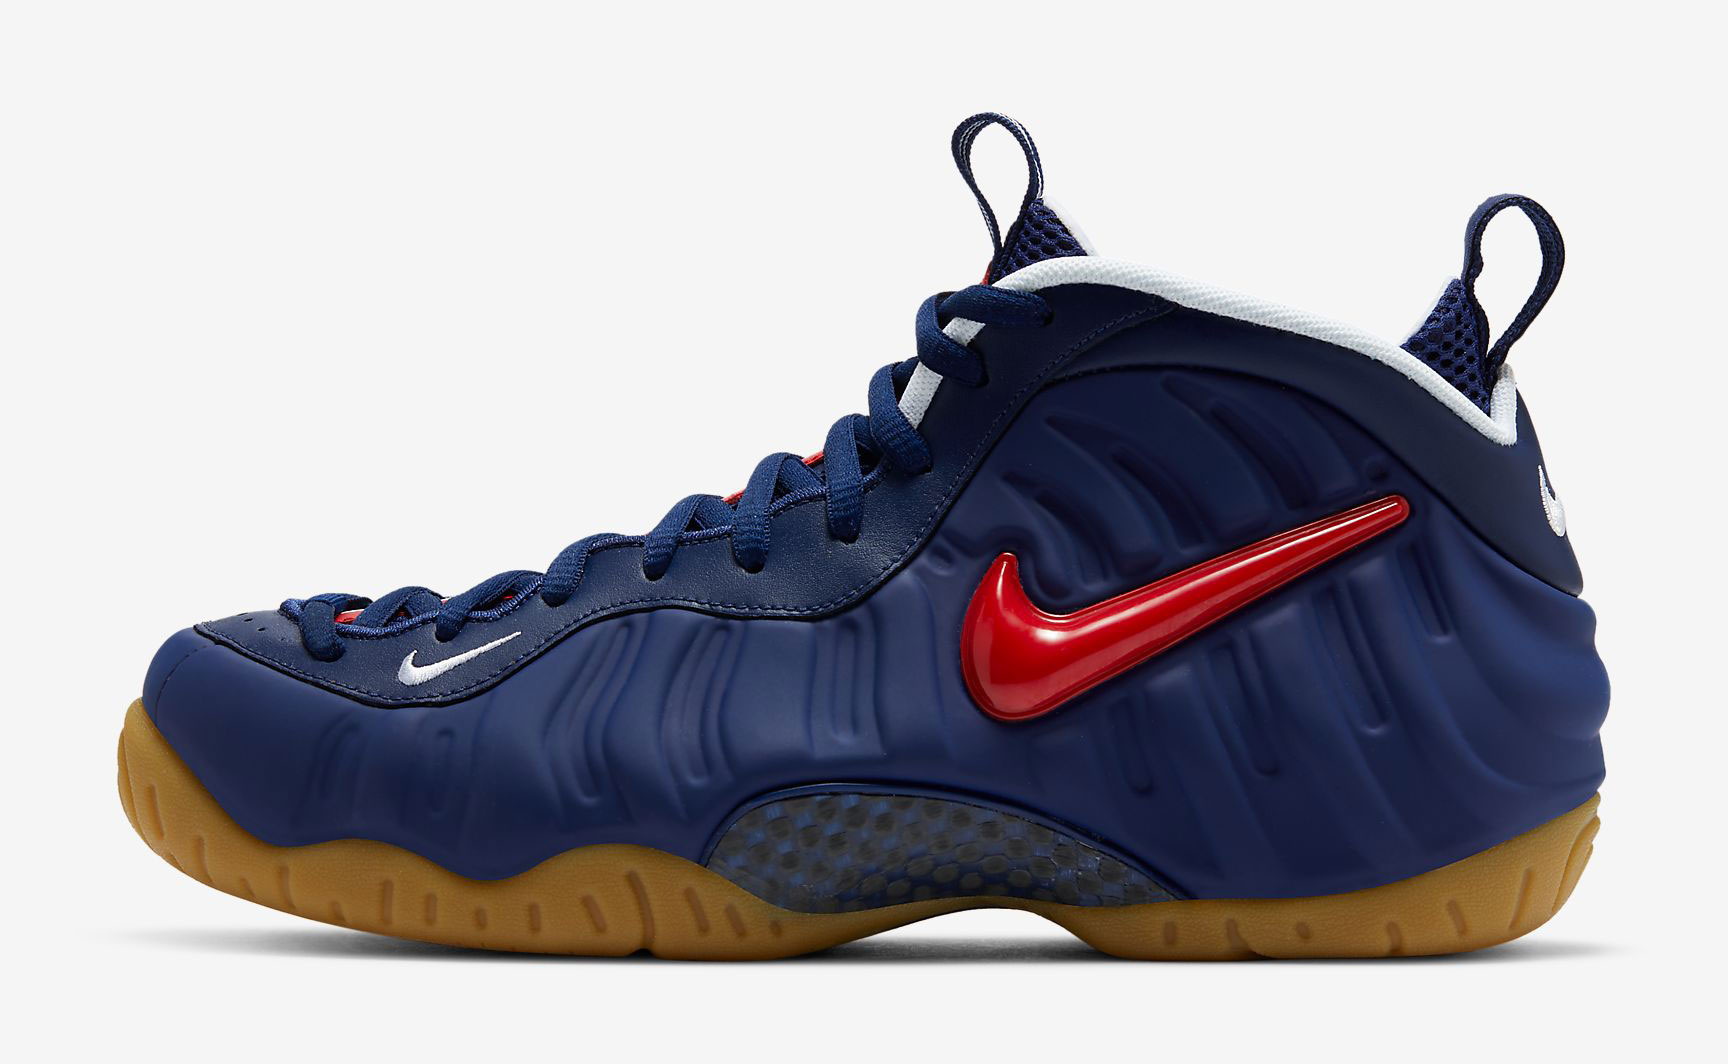 foamposites fourth of july